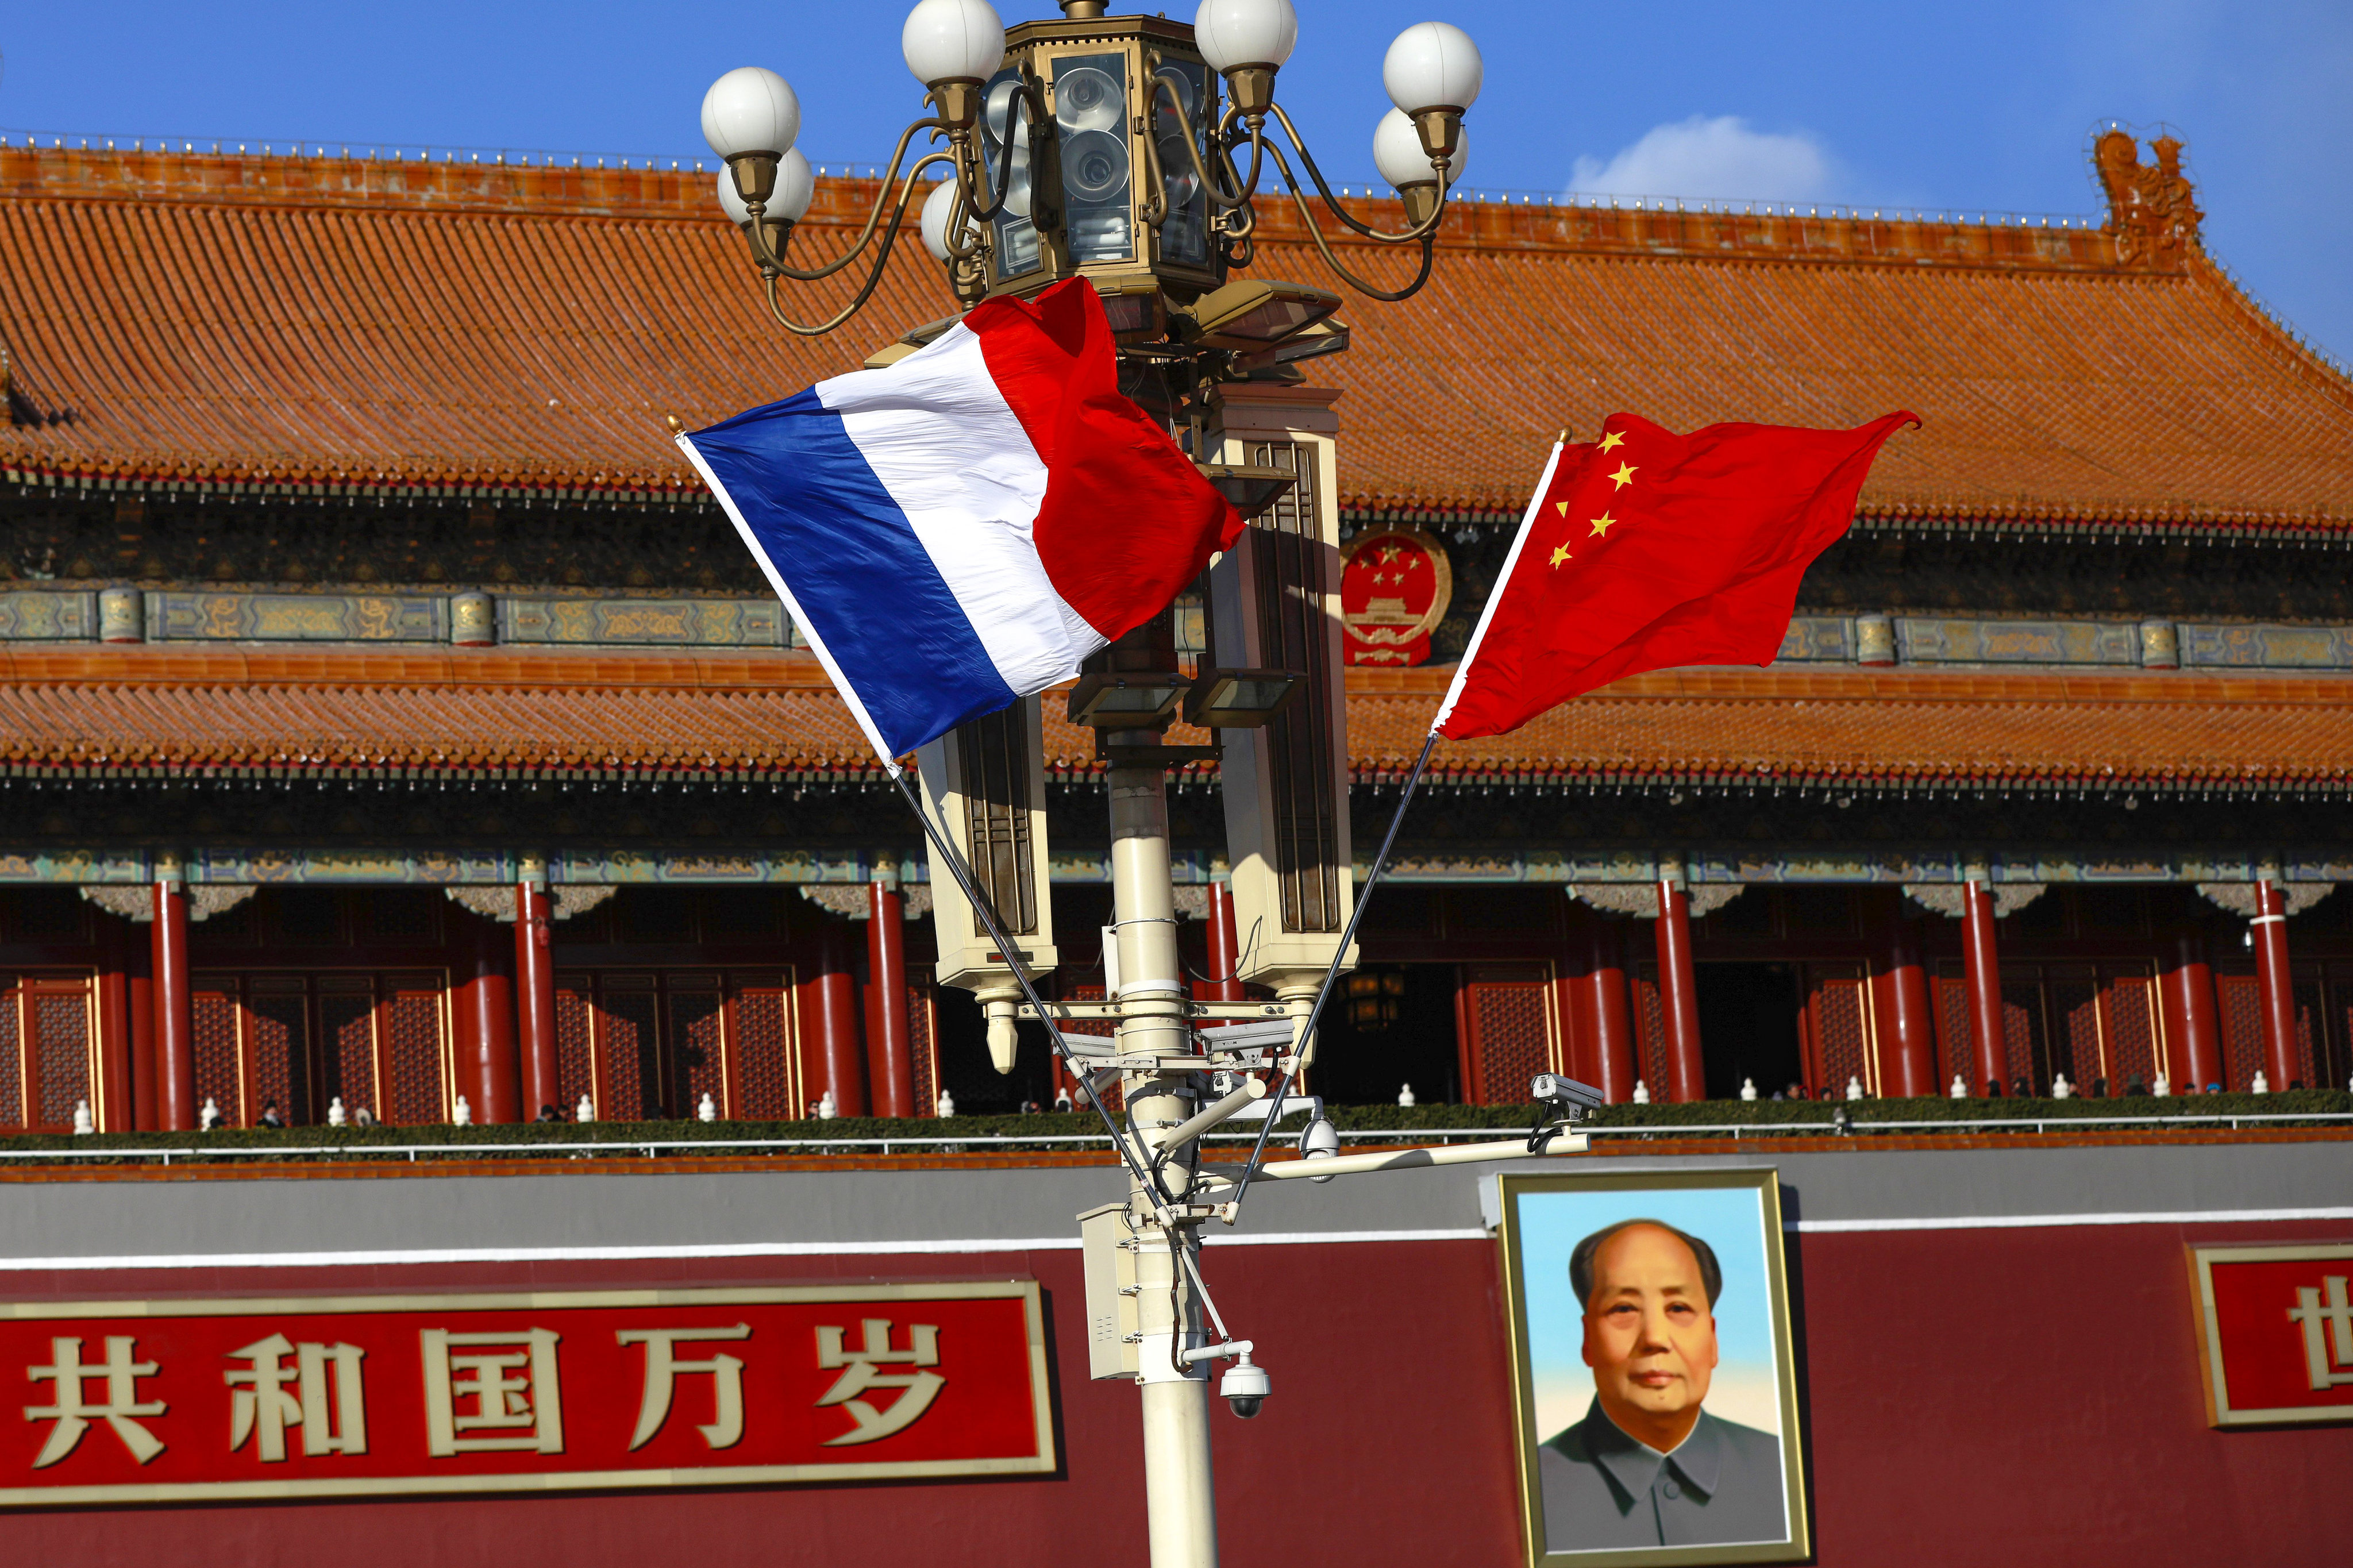 The national flags of France and China in Beijing during President Emmanuel Macron’s official visit in 2018. Photo: EPA-EFE